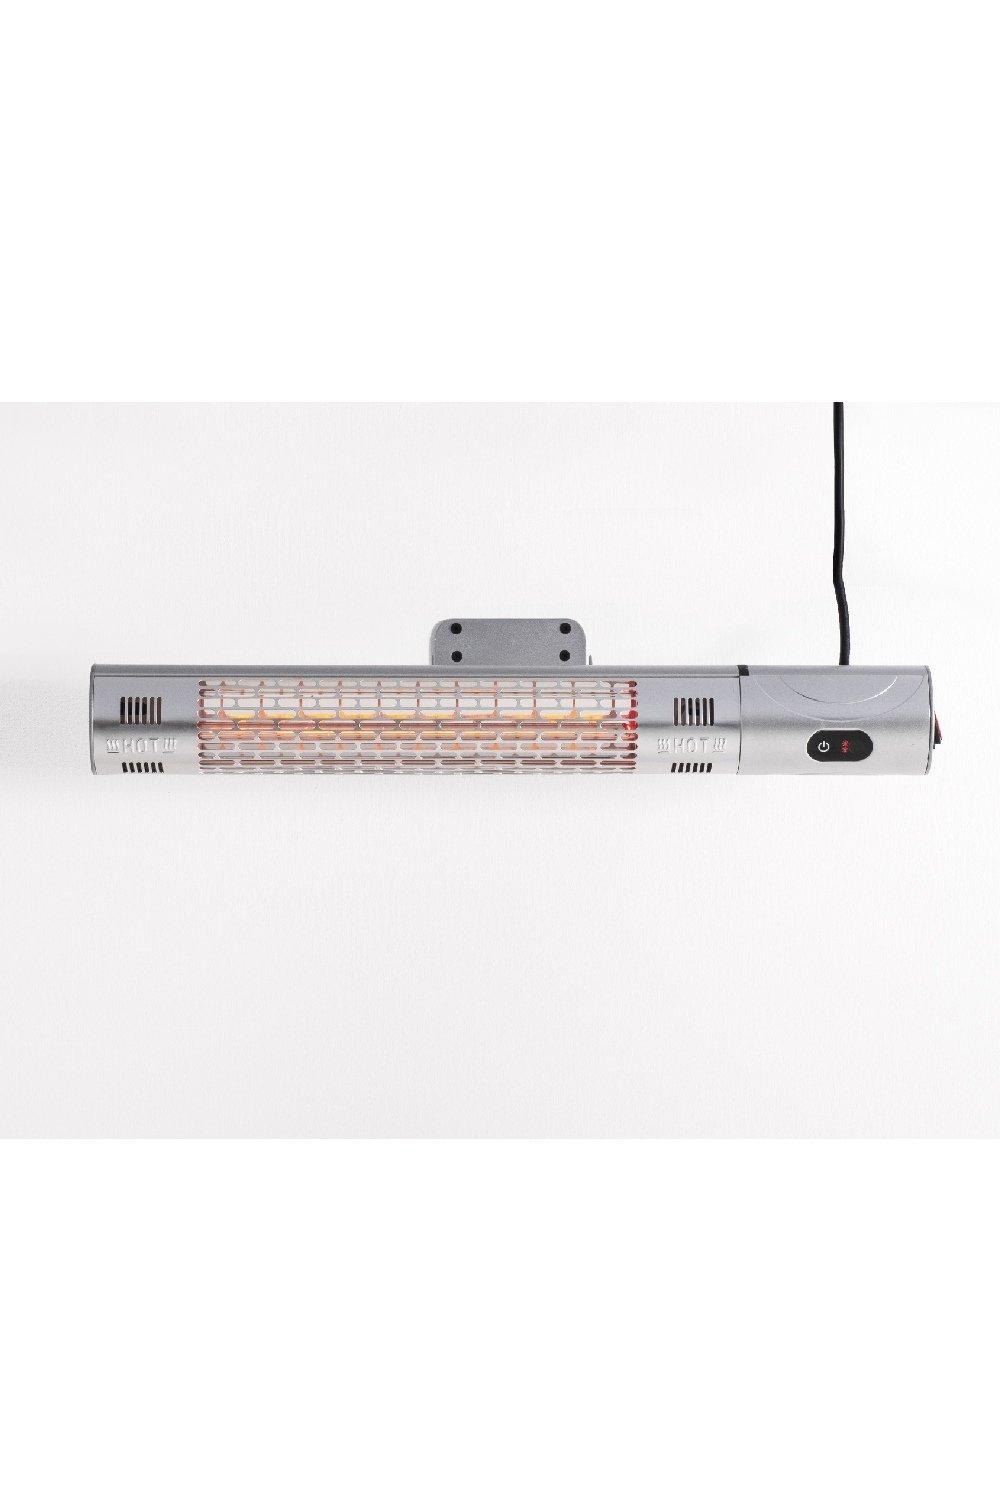 Turin 1500w Wall Mounted Outdoor Electric Patio Heater